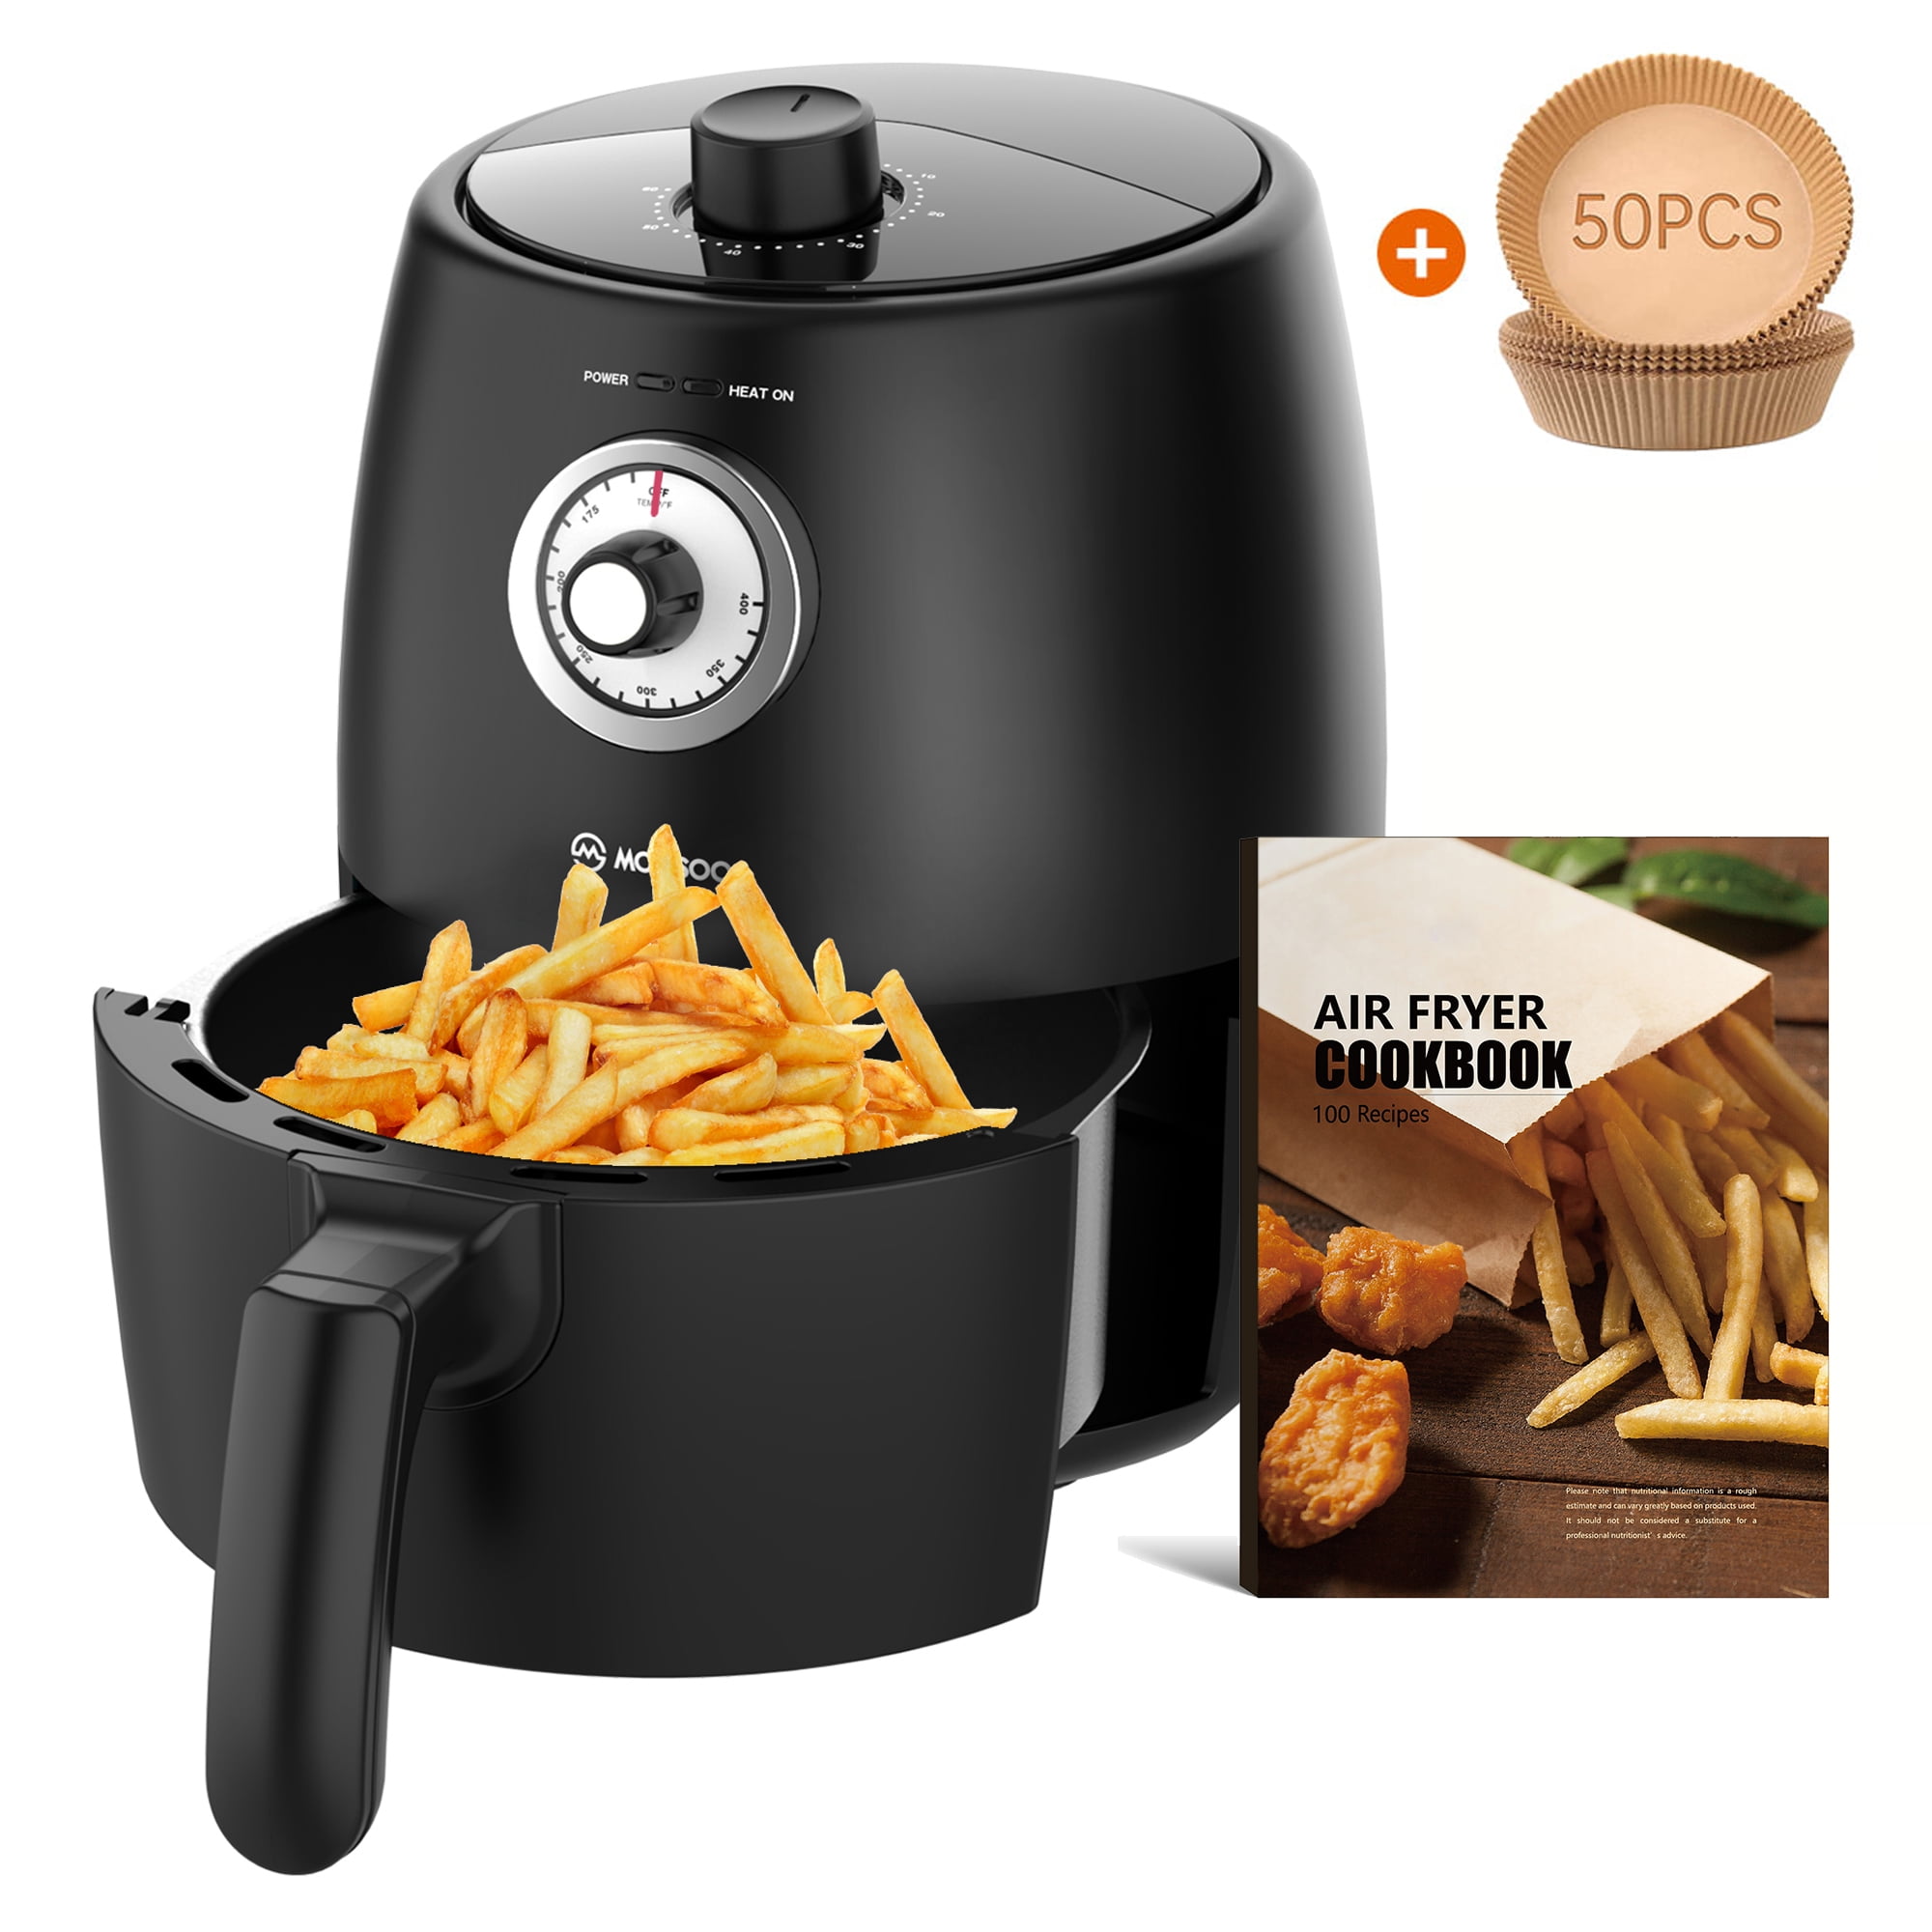 The Unofficial TaoTronics Air Fryer Cookbook: 220+ Amazingly Easy